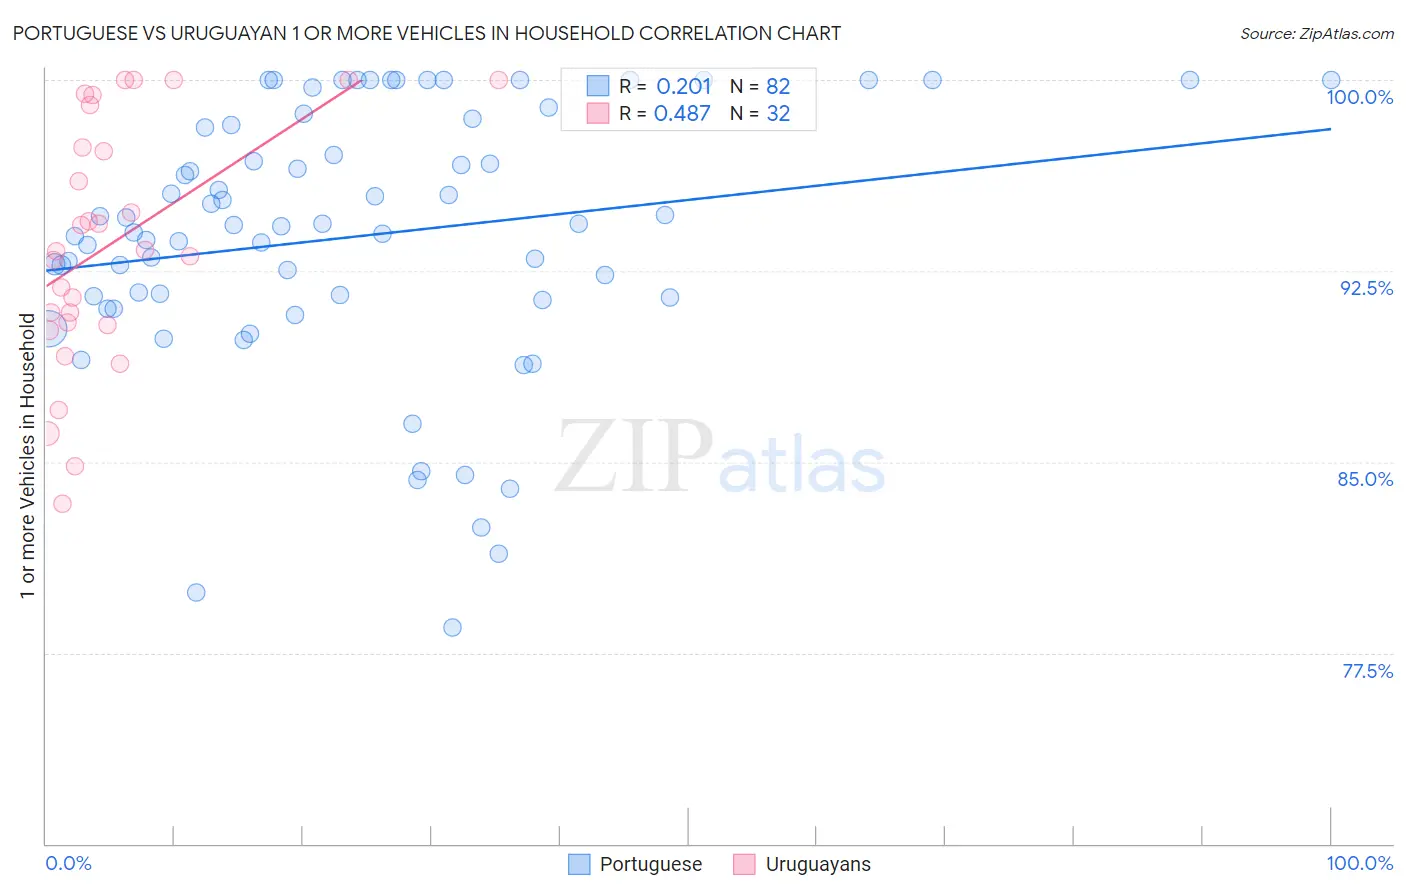 Portuguese vs Uruguayan 1 or more Vehicles in Household